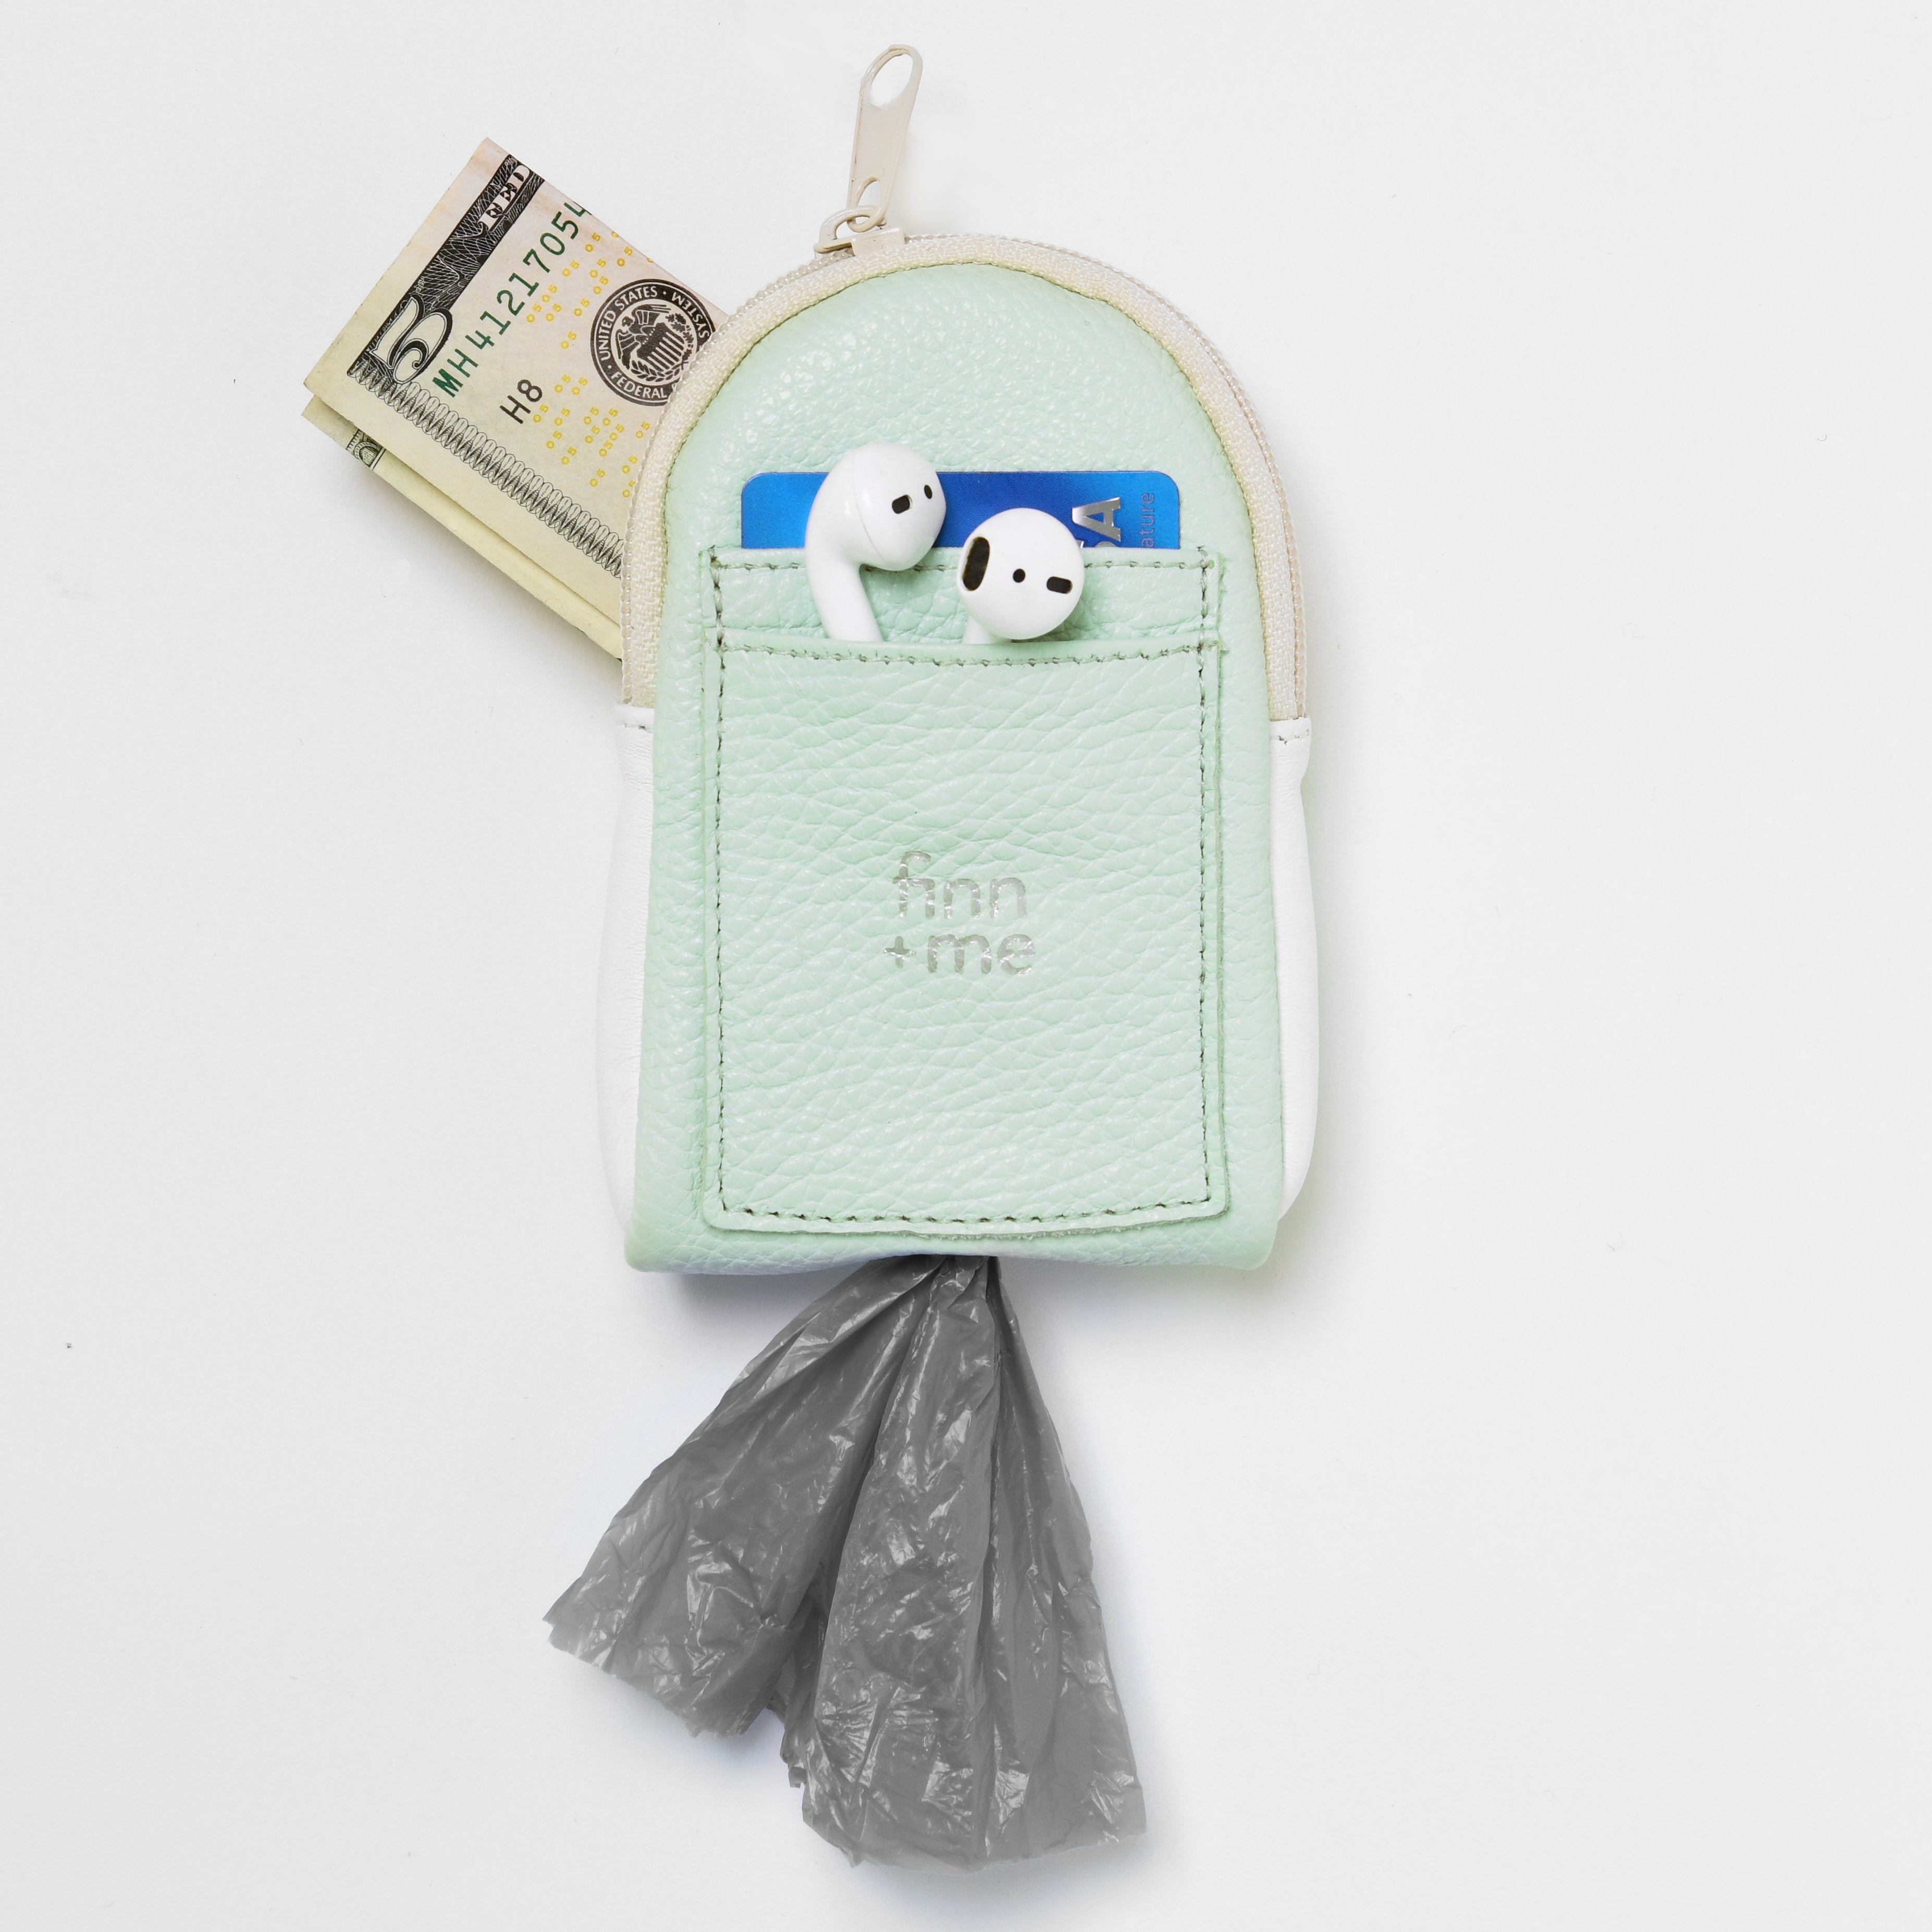 Coin Purse/pouch/ Pods/ Doggie Poo Bag Holder/ Coin or Key 